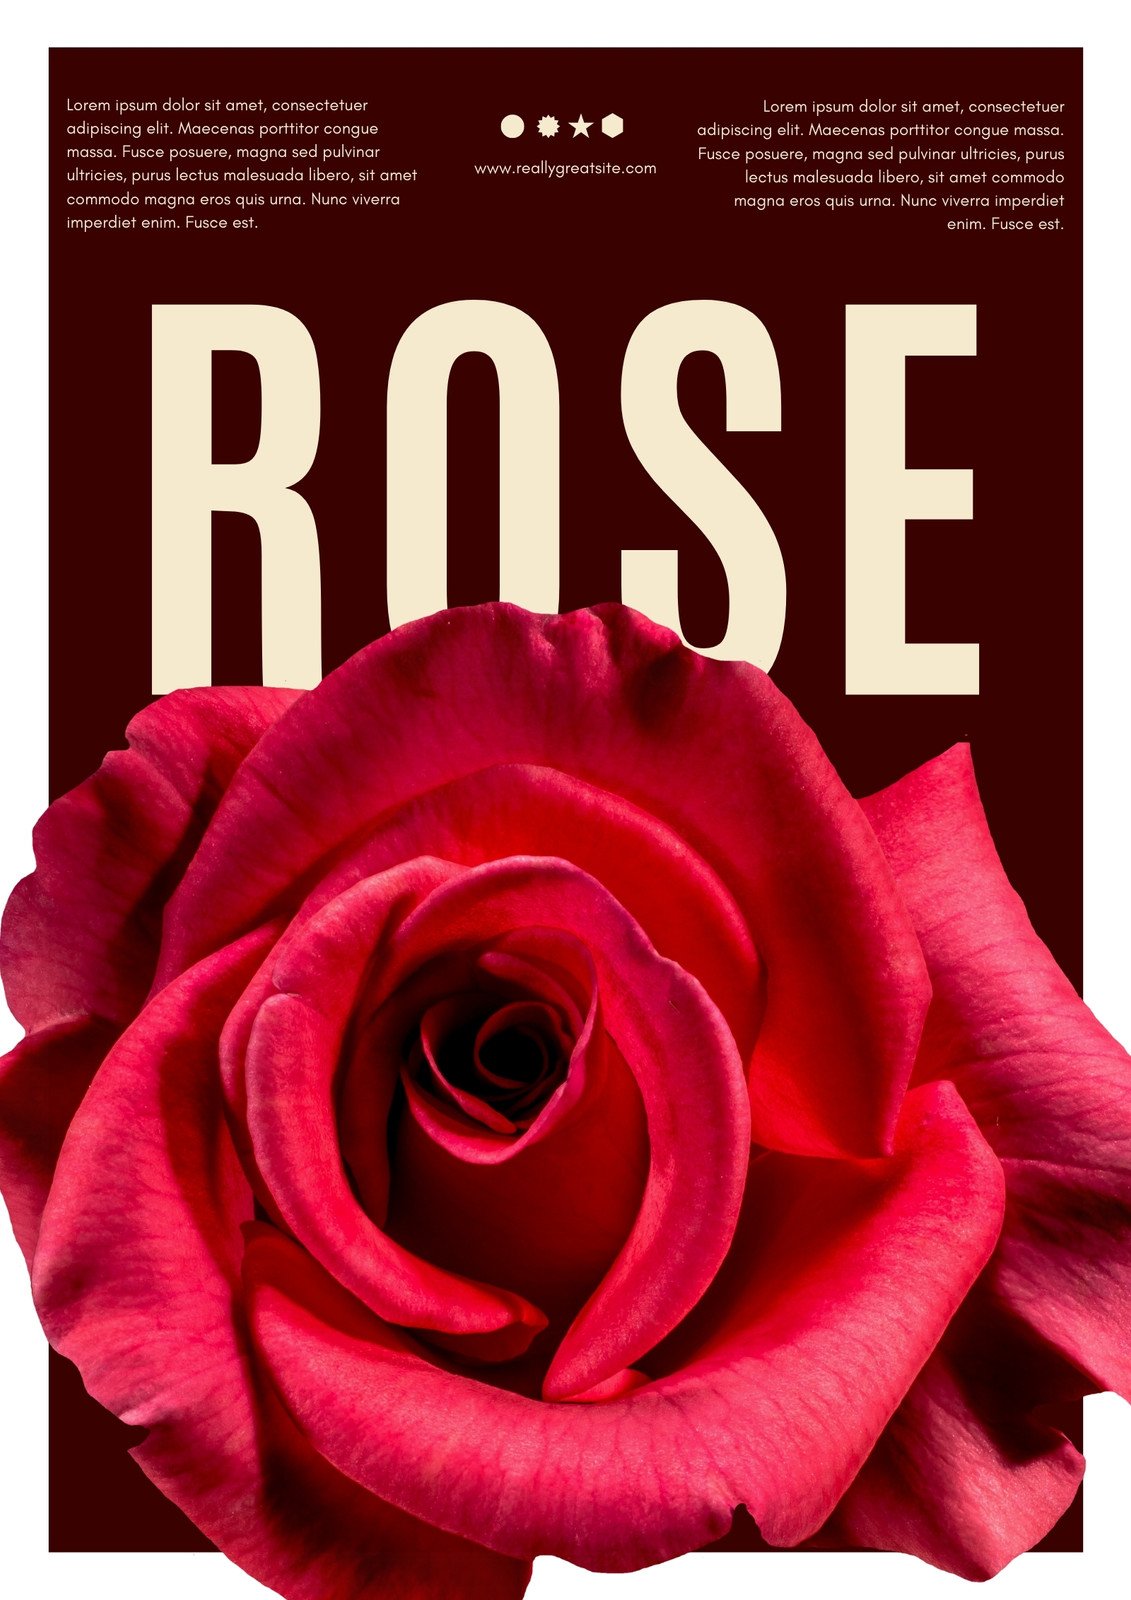 rose flowers cover photo